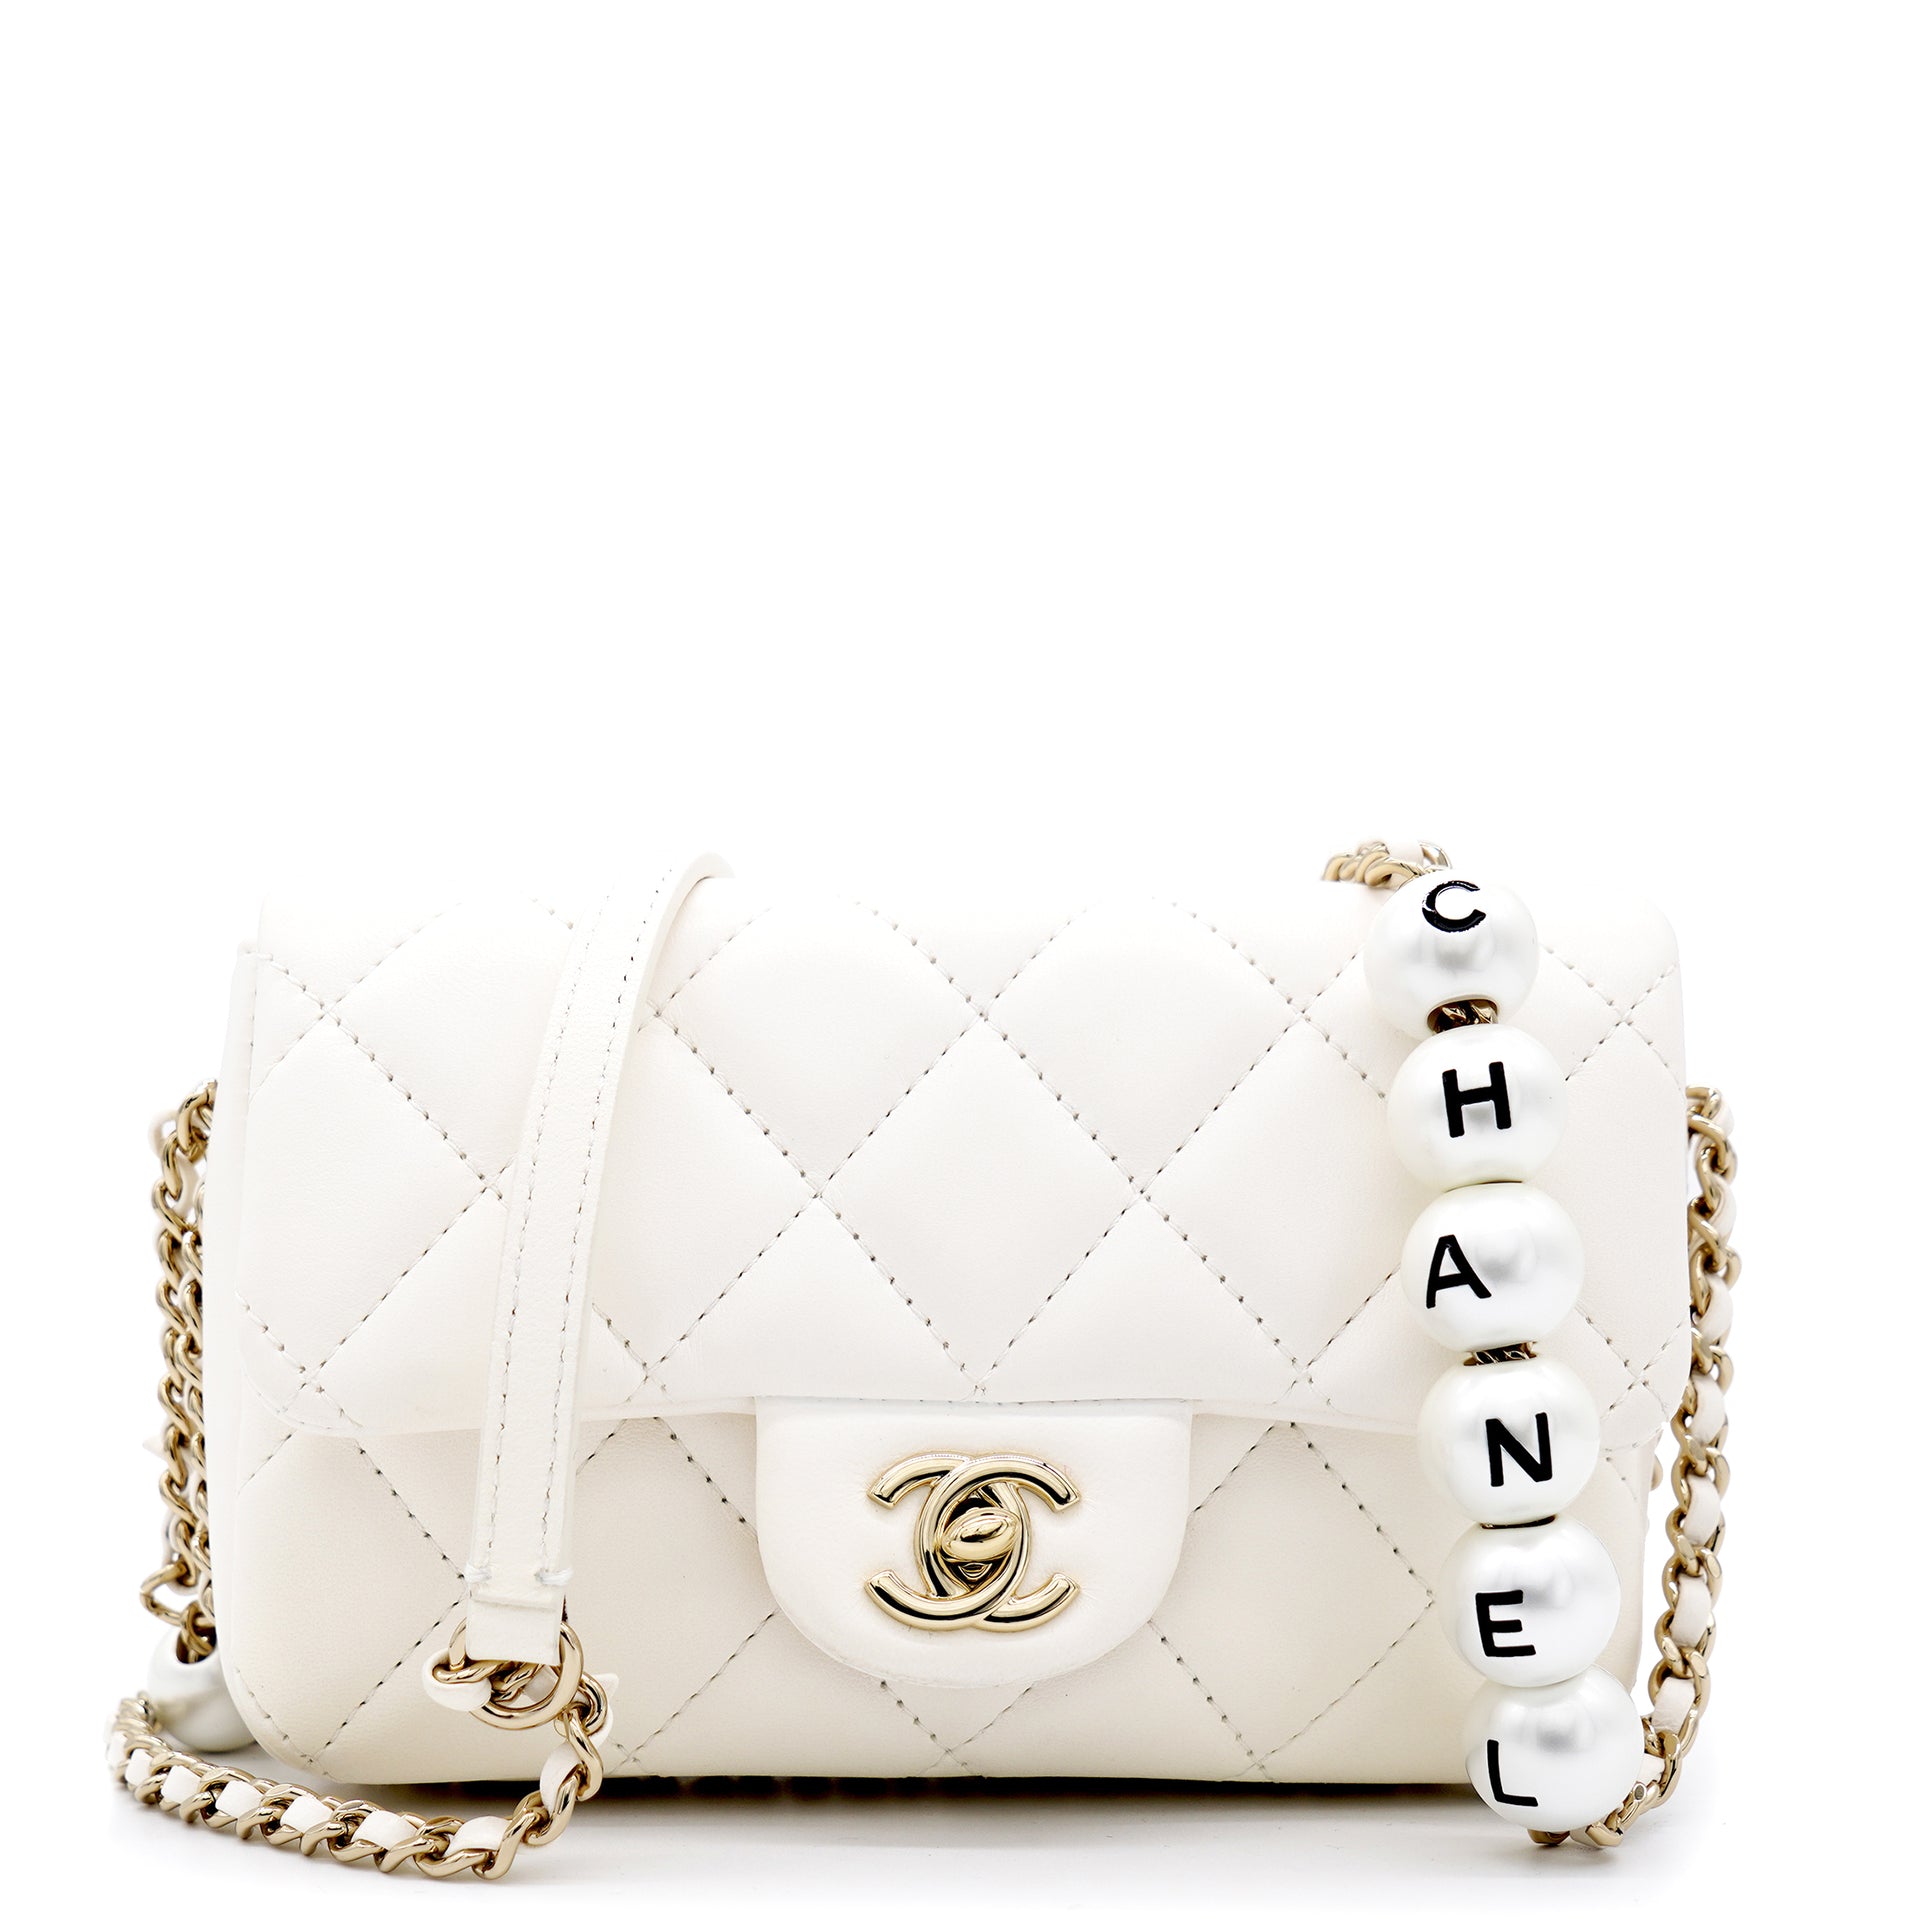 CHANEL Lambskin Quilted Small Trendy CC Dual Handle Flap Bag White